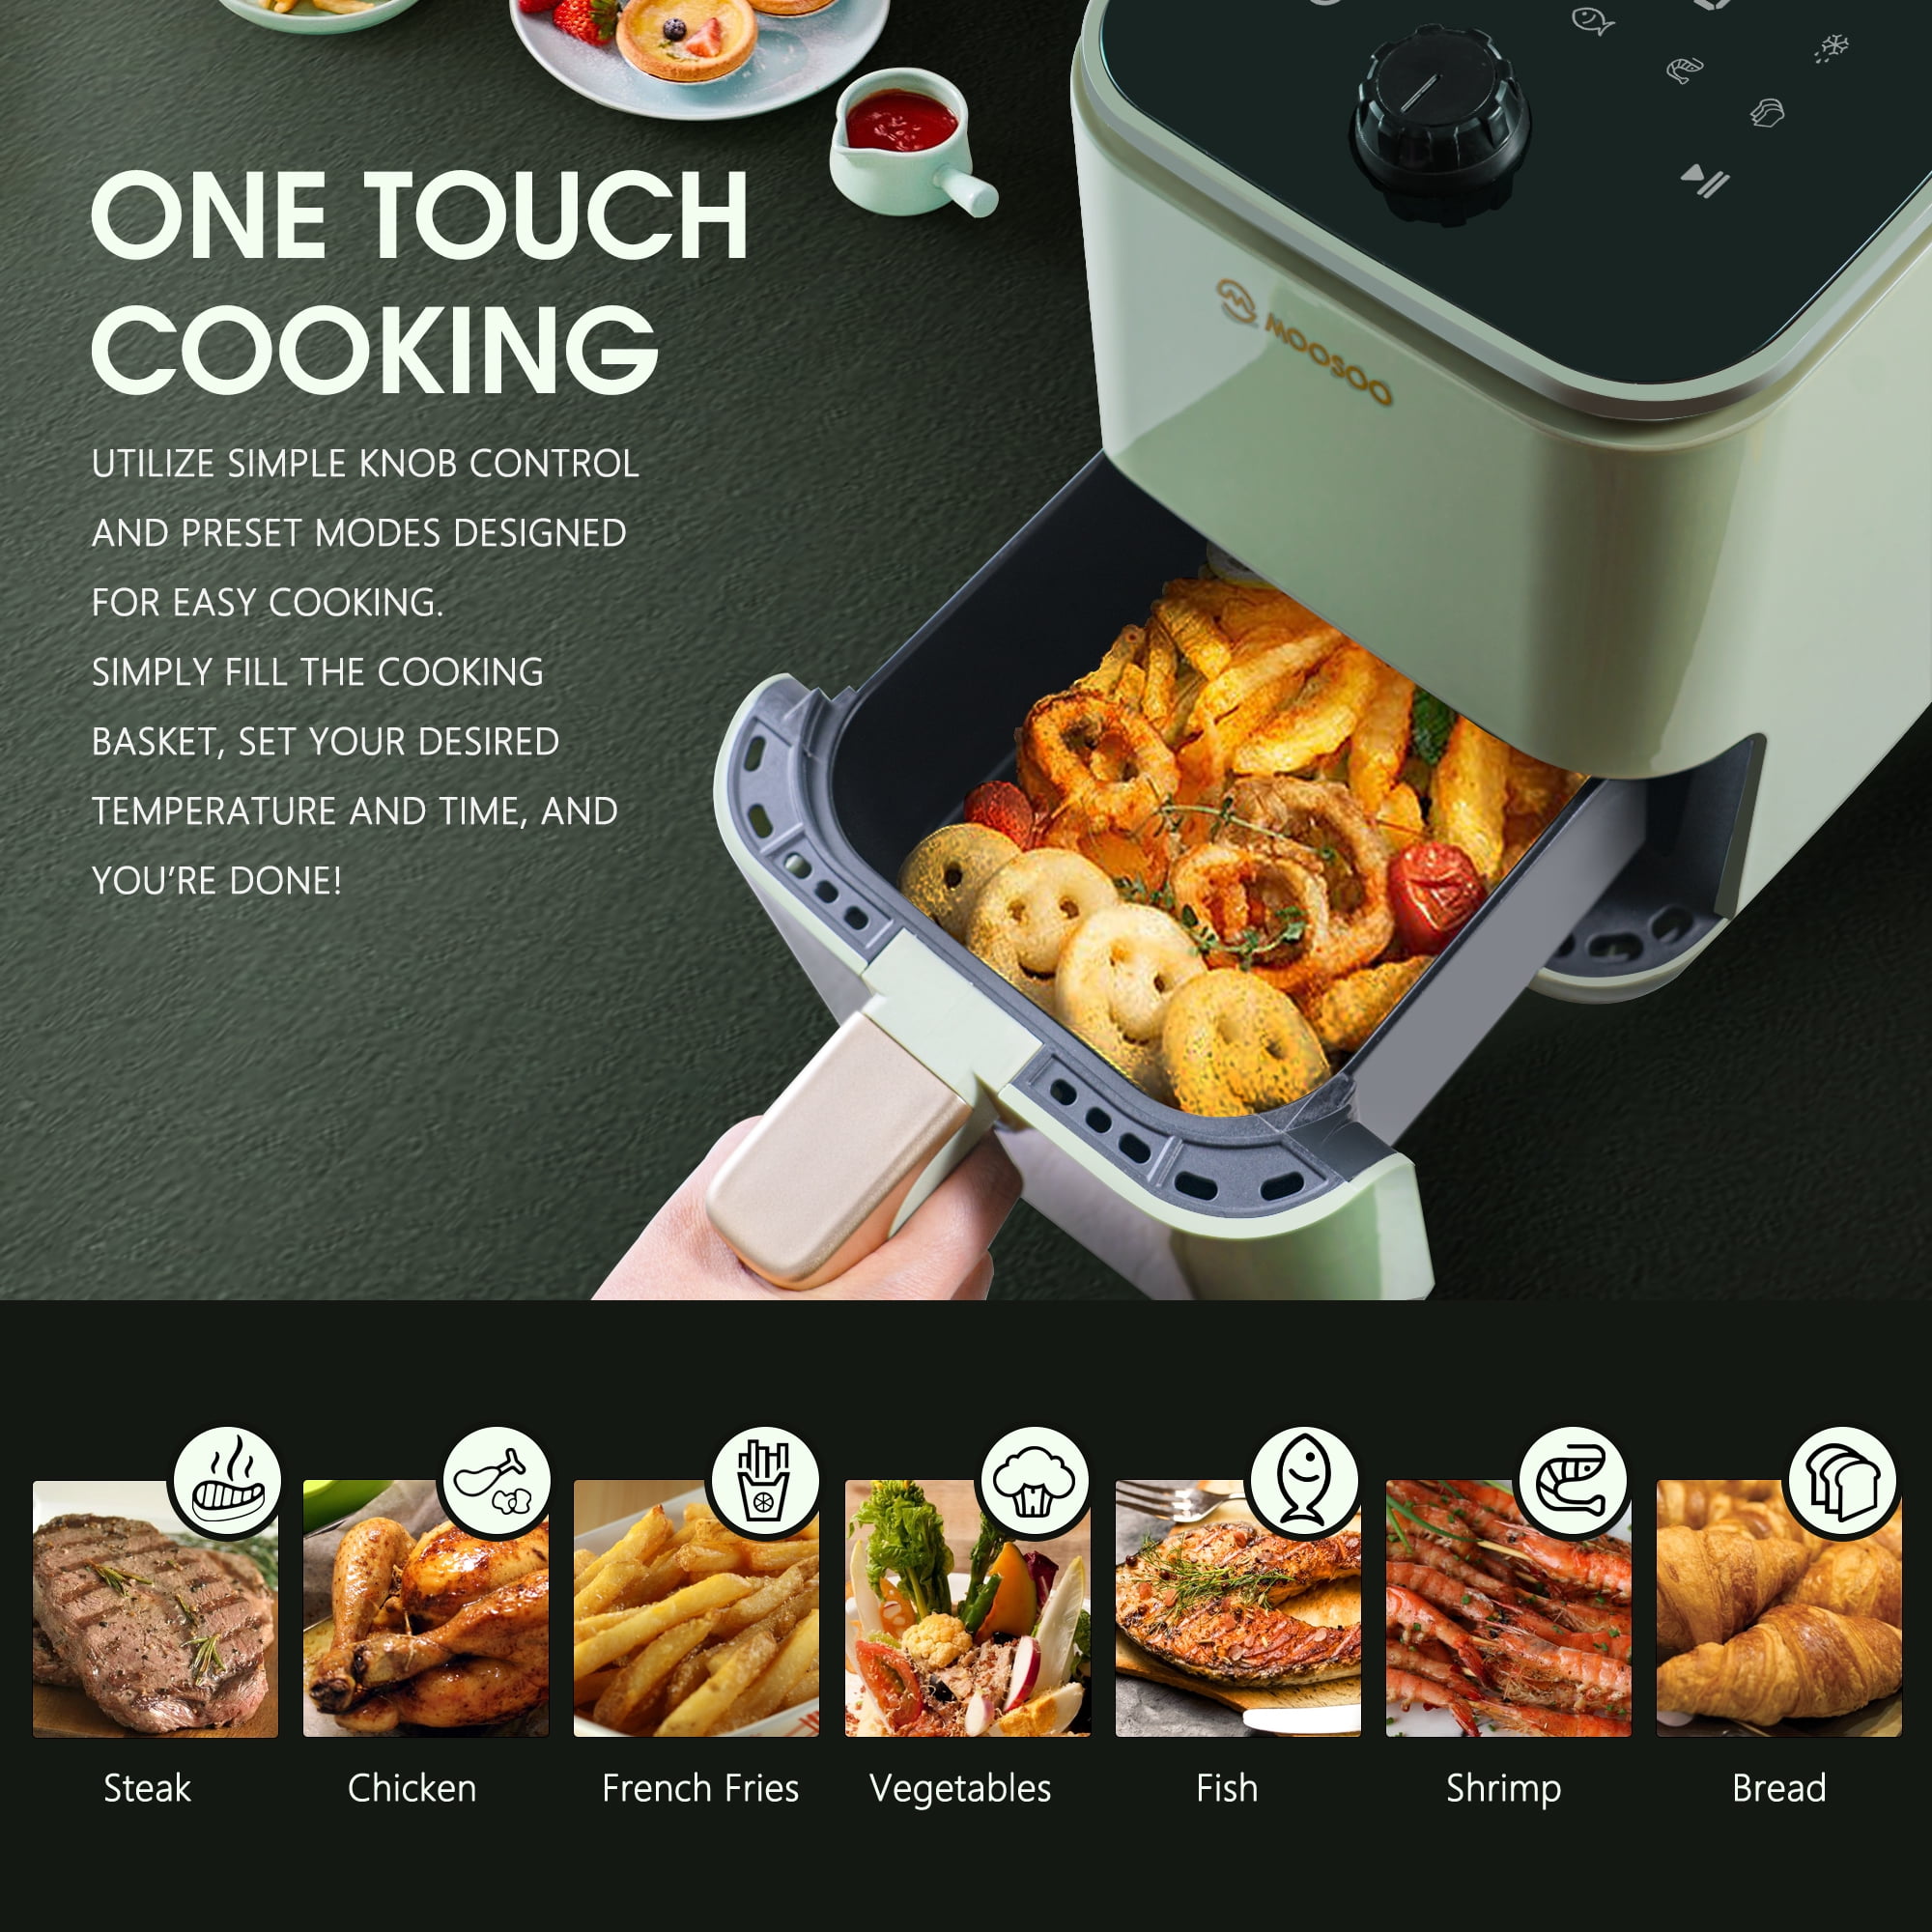 MOOSOO Dual Basket Air Fryer Oven, 2 Independent 3 Qt Baskets, with Knob  Control, Dehydrator & Bake 